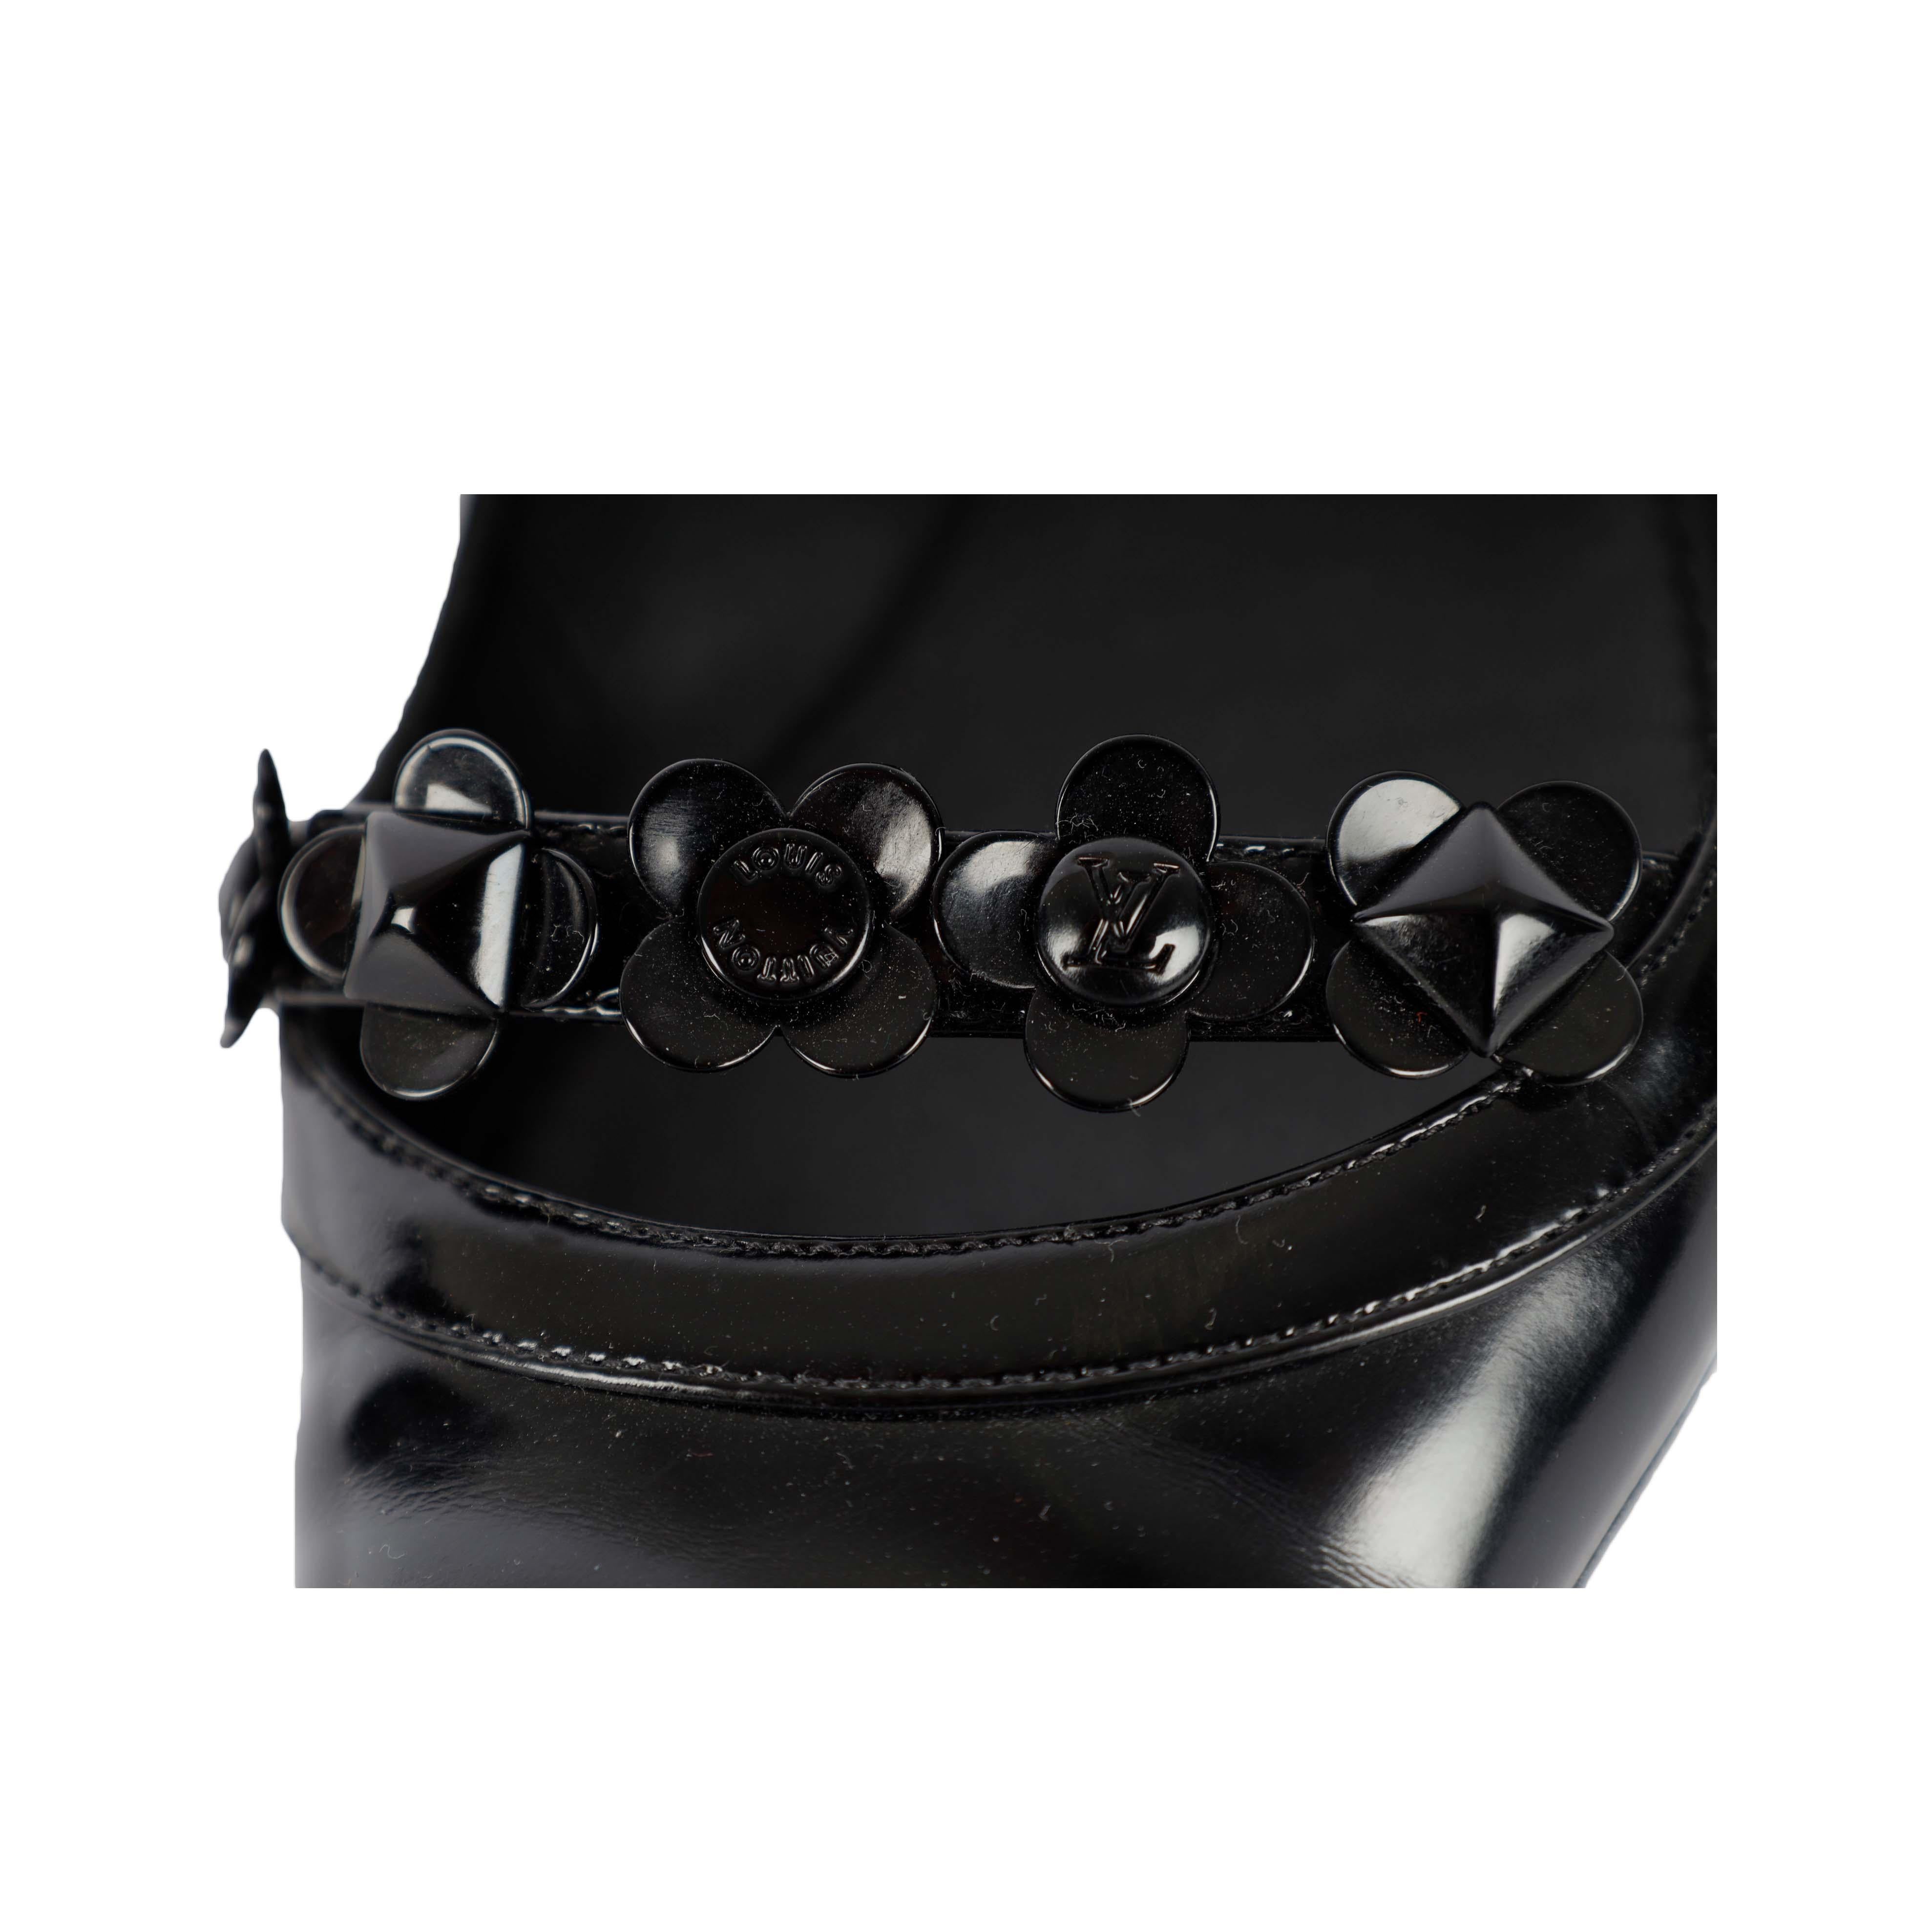 Showcasing a pointed toe, the Louis Vuitton Black Fleur Pointed Toe Flats display the emblematic flowers of brand with the brand name etched on one flower and the monogram etched on the other. The flats are slightly raised with a tiny